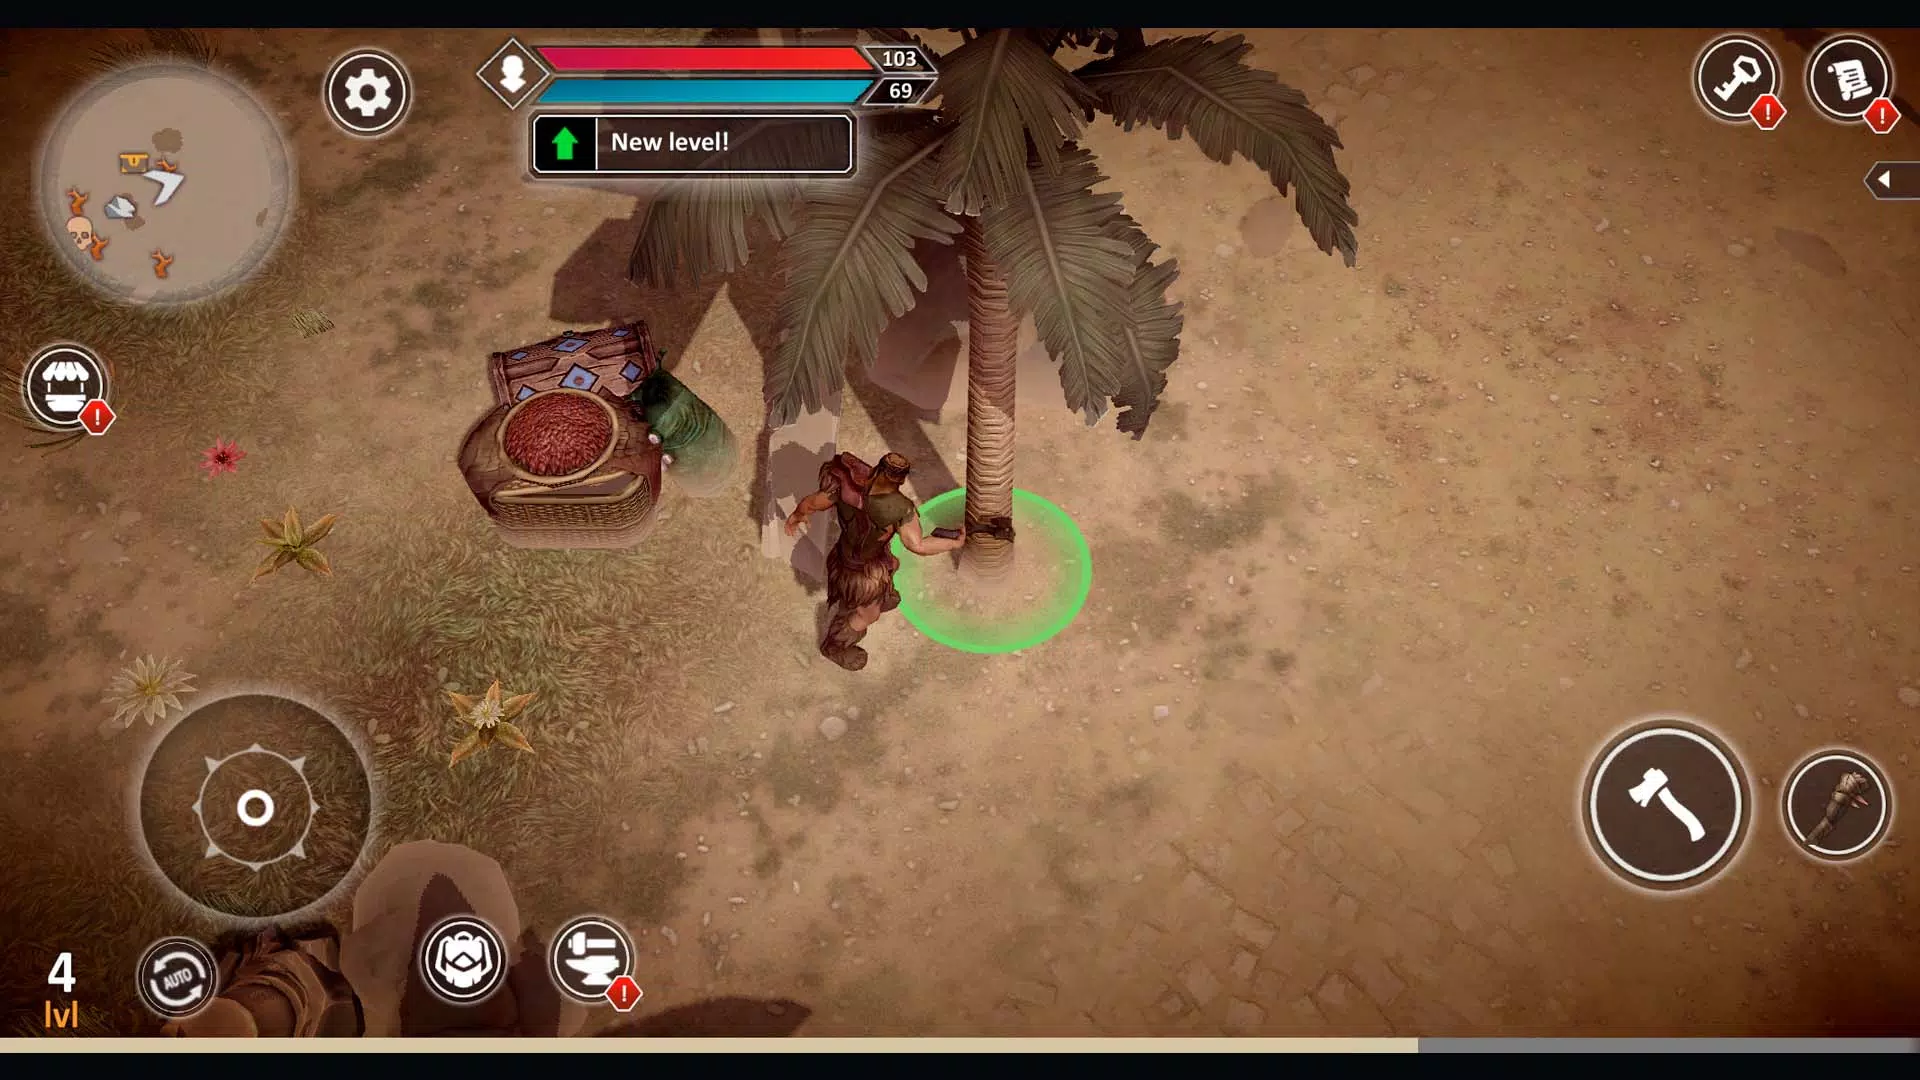 Download tribals io APK v1.5 For Android